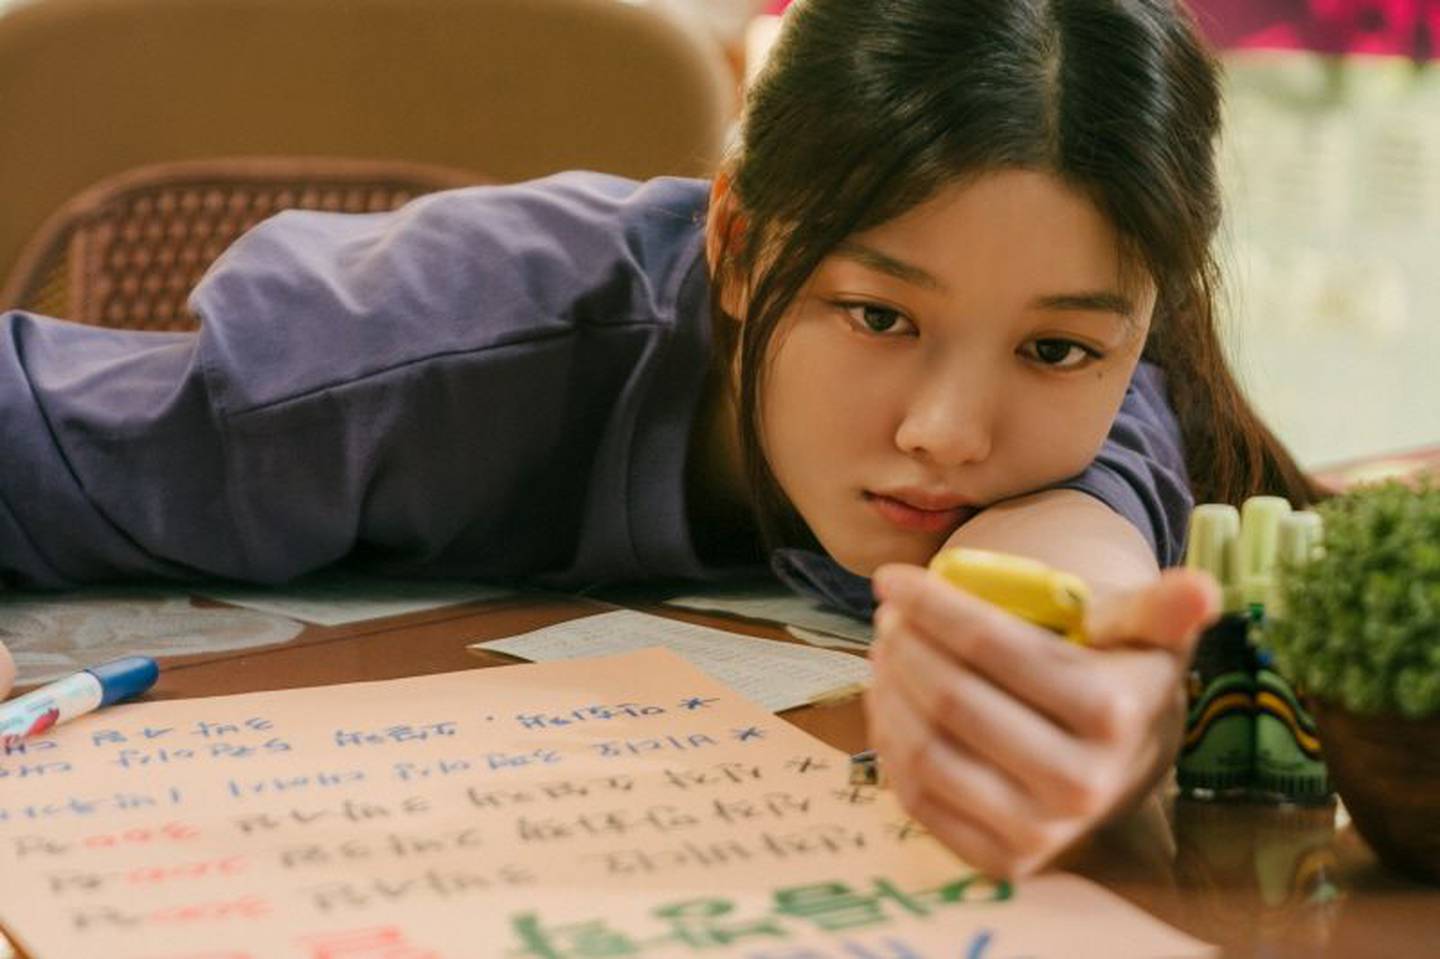 Scenes from '20th century girl'